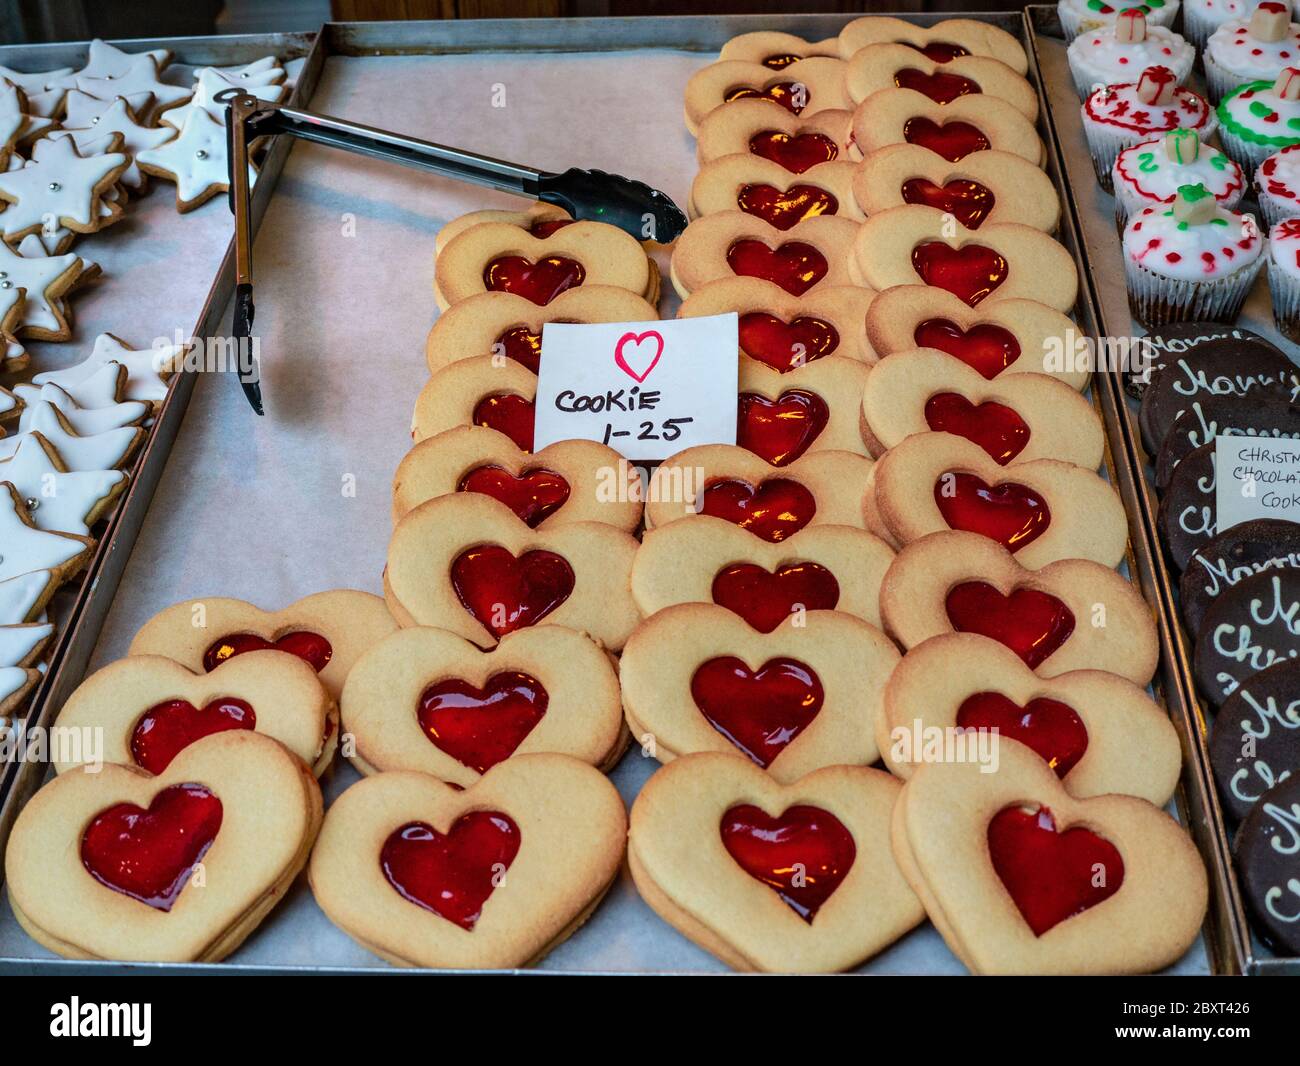 CHRISTMAS COOKIES JAM HEARTS BISCUITS STALL Heart shaped 'Love'  cookies on sale at Borough Market a popular produce retail market Southwark London Stock Photo